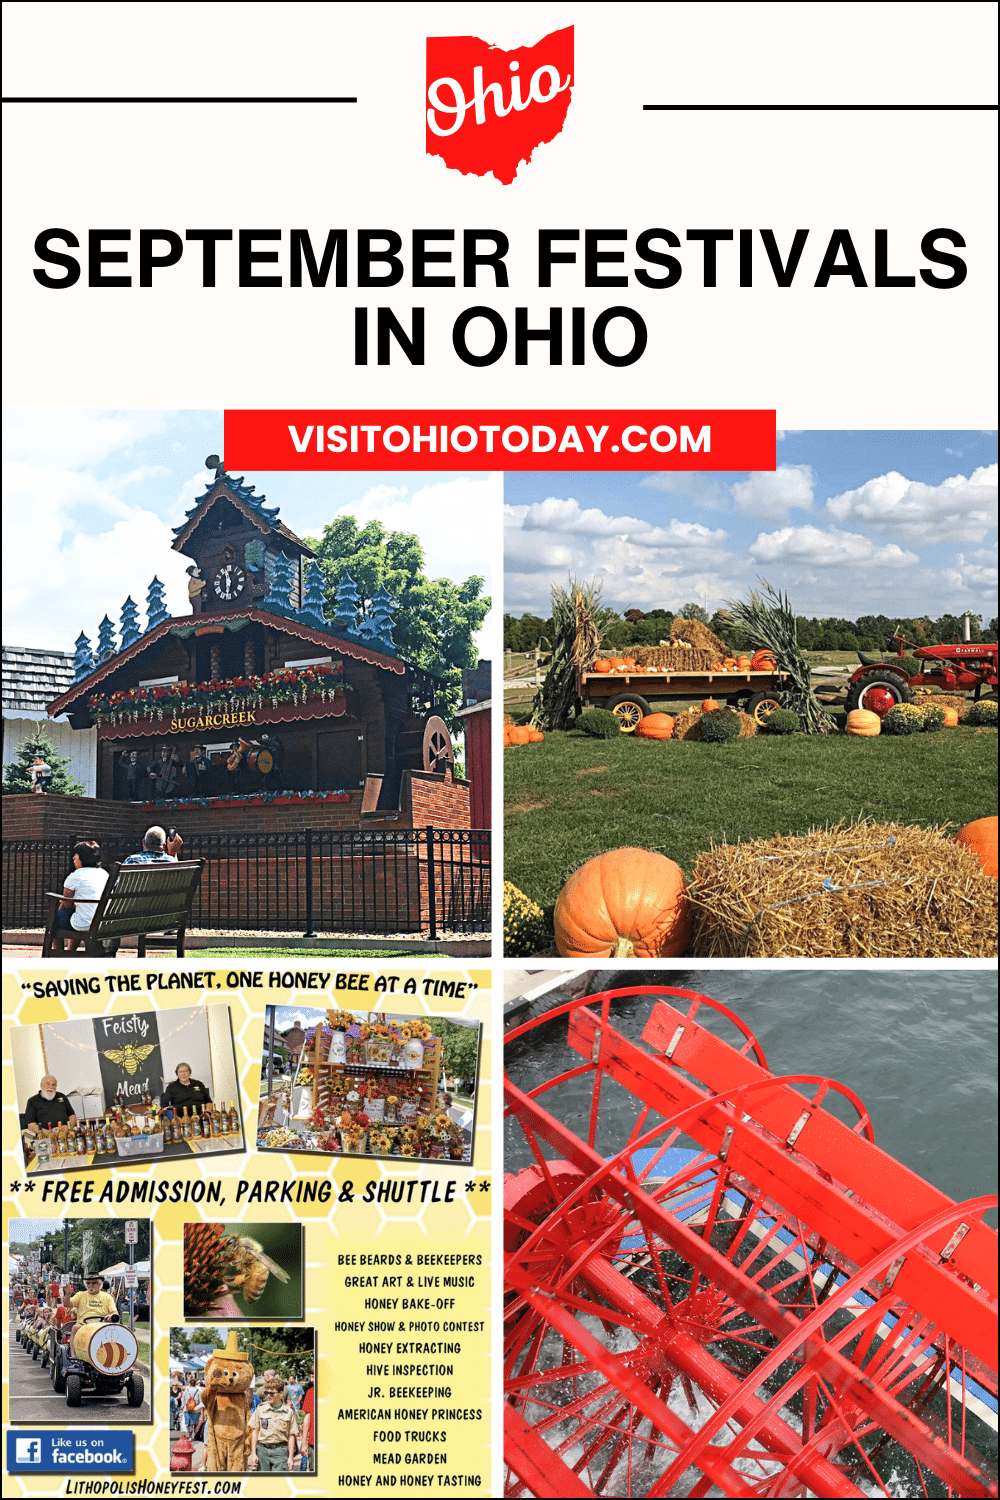 A vertical image for Pinterest of 4 photos of festivals occurring in September in Ohio.  The pictures depict a giant cuckoo clock, a pumpkin farm, a flyer for Lithopolis Honeyfest, and the back of a riverboat. A white block at the top has text September Festivals in Ohio. A red block underneath has text VisitOhioToday.com